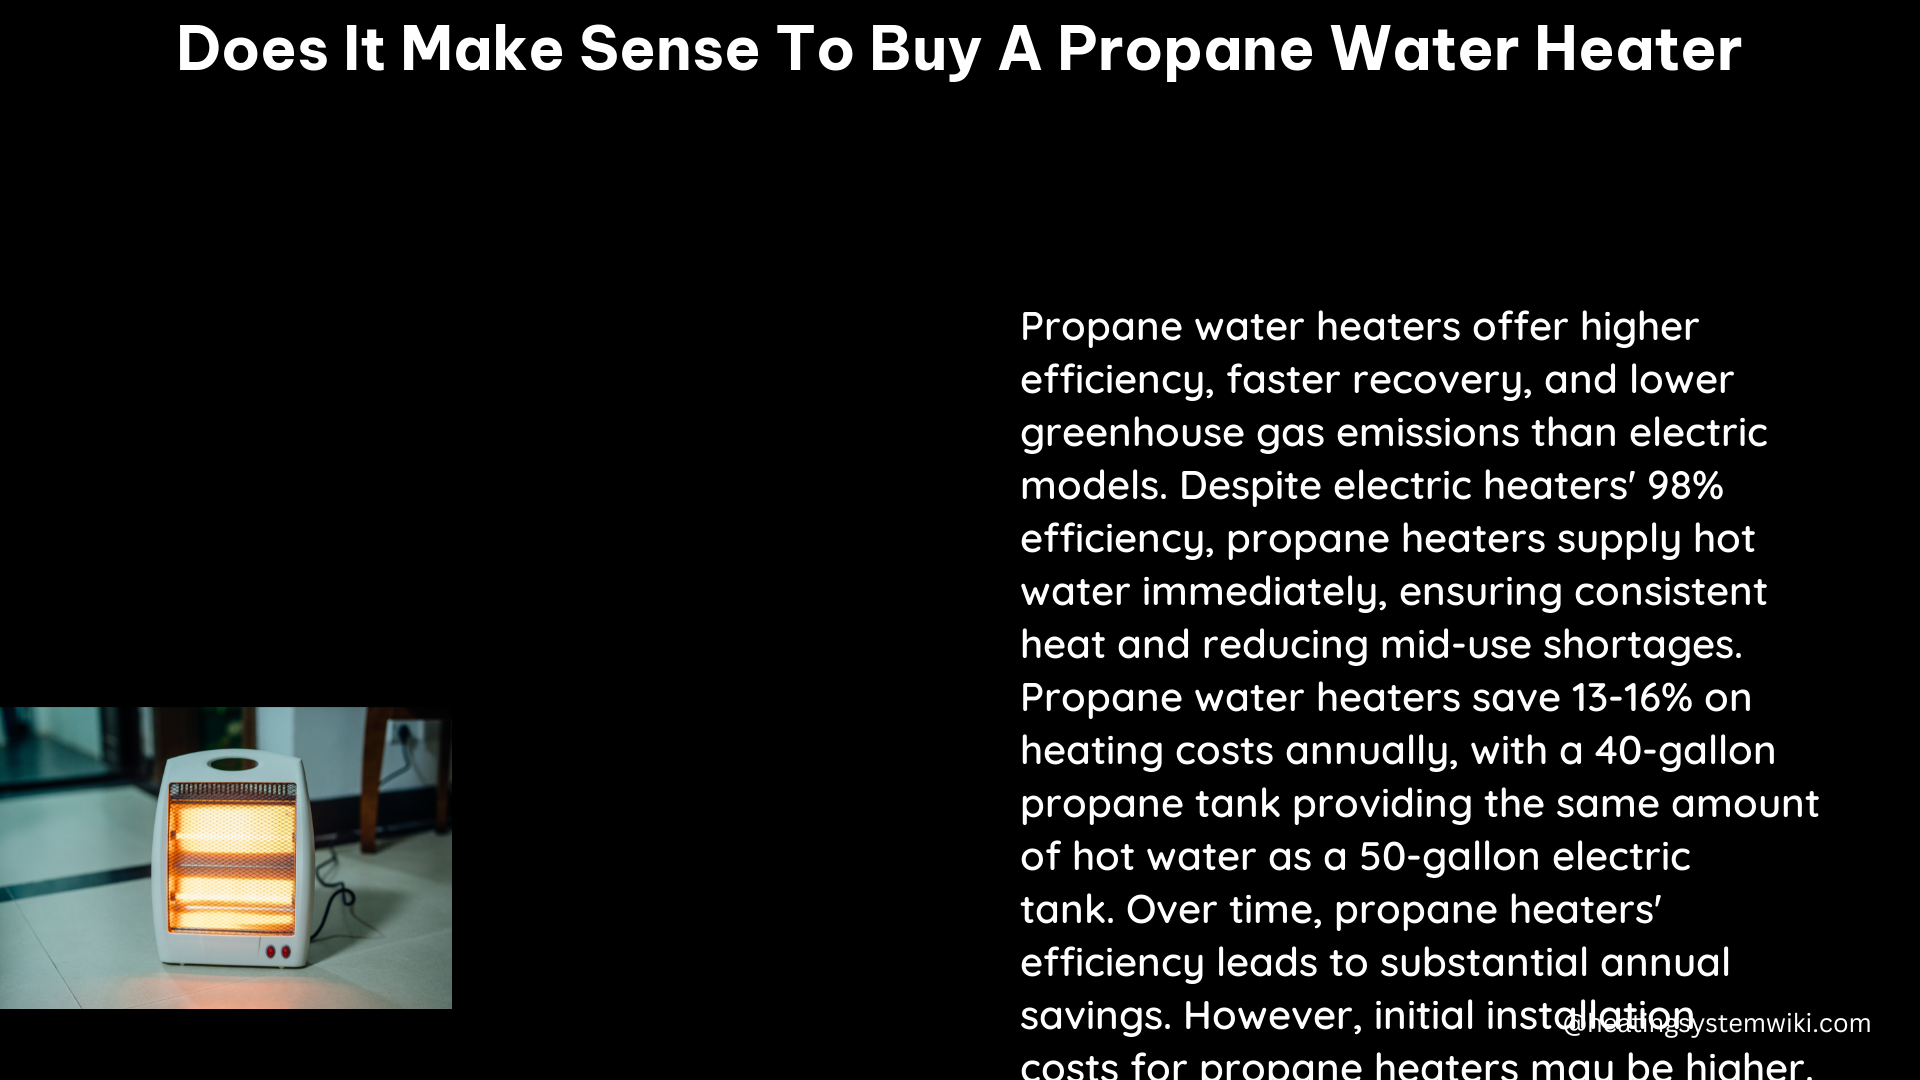 does it make sense to buy a propane water heater